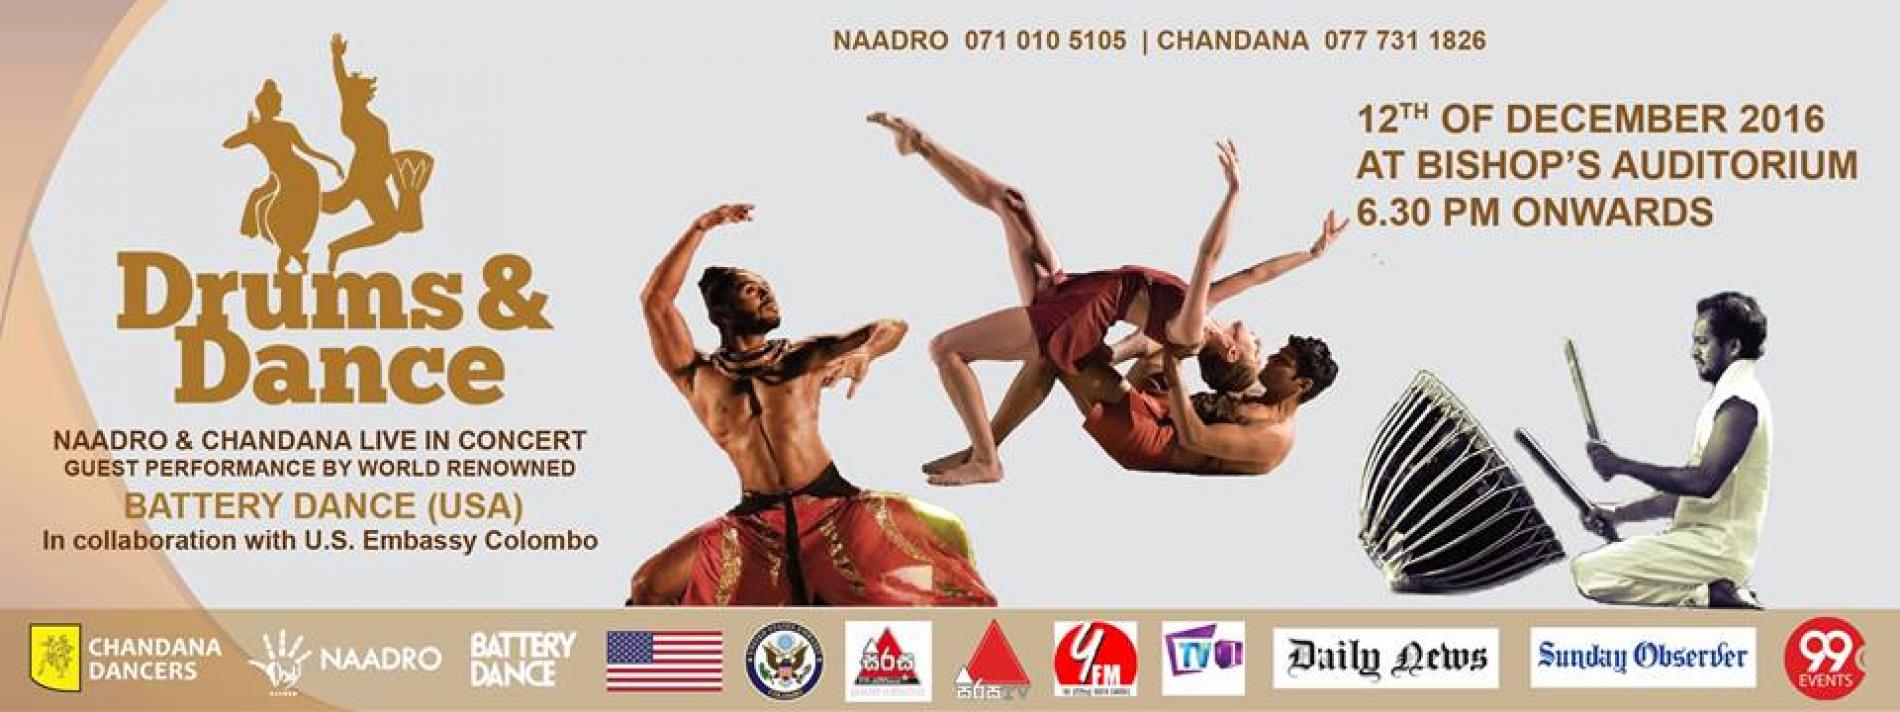 Naadro & Chandana Live In Concert With Battery Dance USA